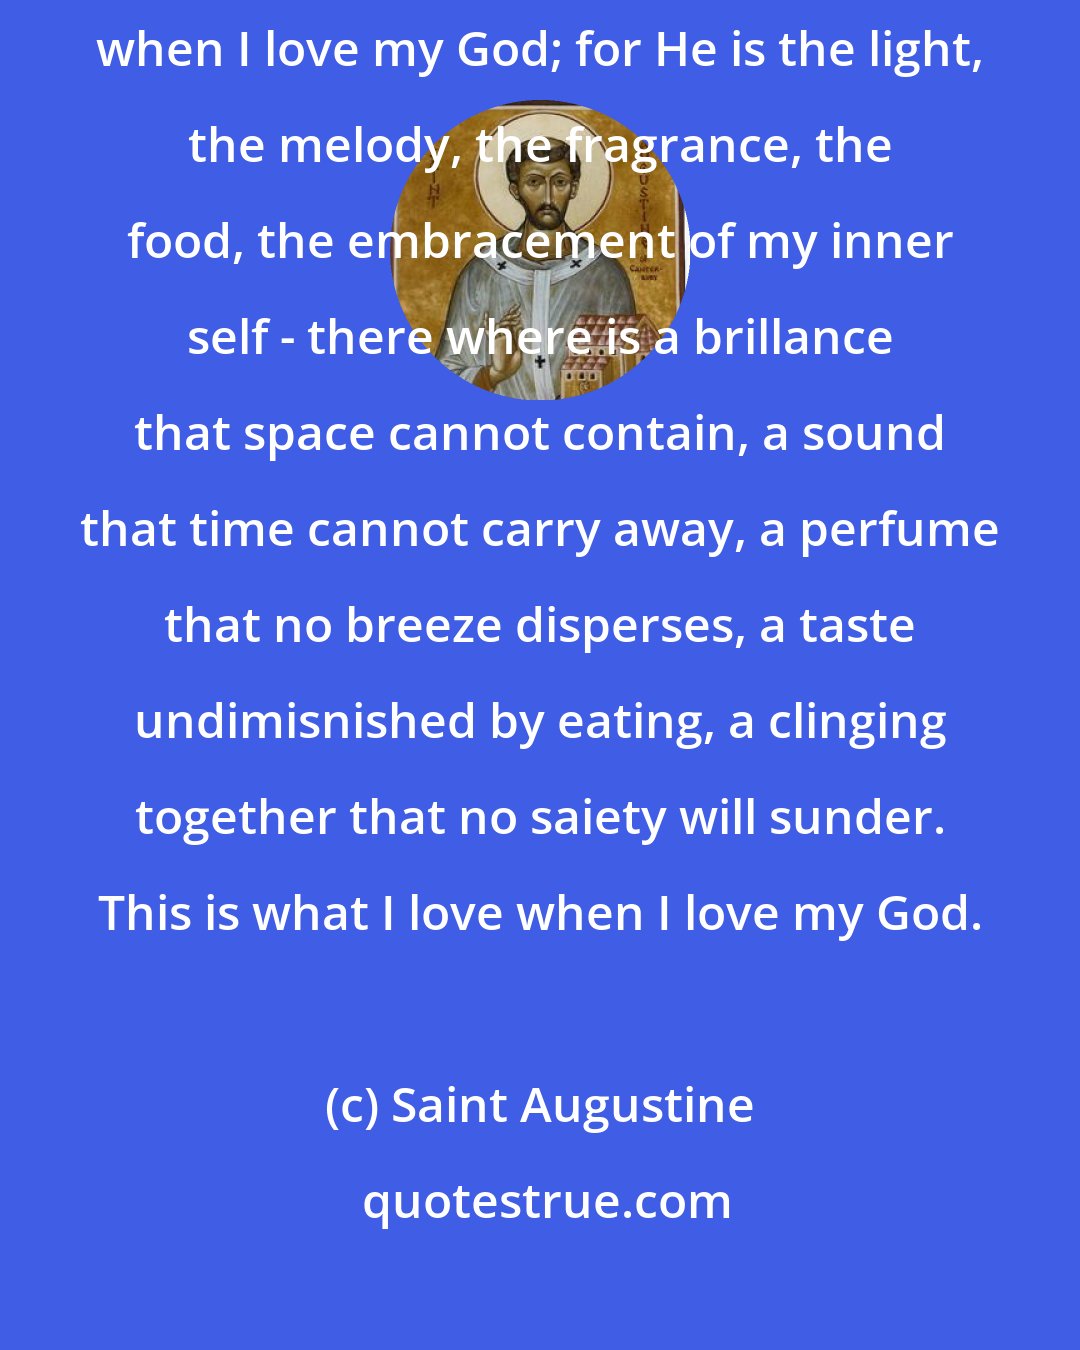 Saint Augustine: And yet I do love a kind of light, melody, fragrance, food, embracement when I love my God; for He is the light, the melody, the fragrance, the food, the embracement of my inner self - there where is a brillance that space cannot contain, a sound that time cannot carry away, a perfume that no breeze disperses, a taste undimisnished by eating, a clinging together that no saiety will sunder. This is what I love when I love my God.